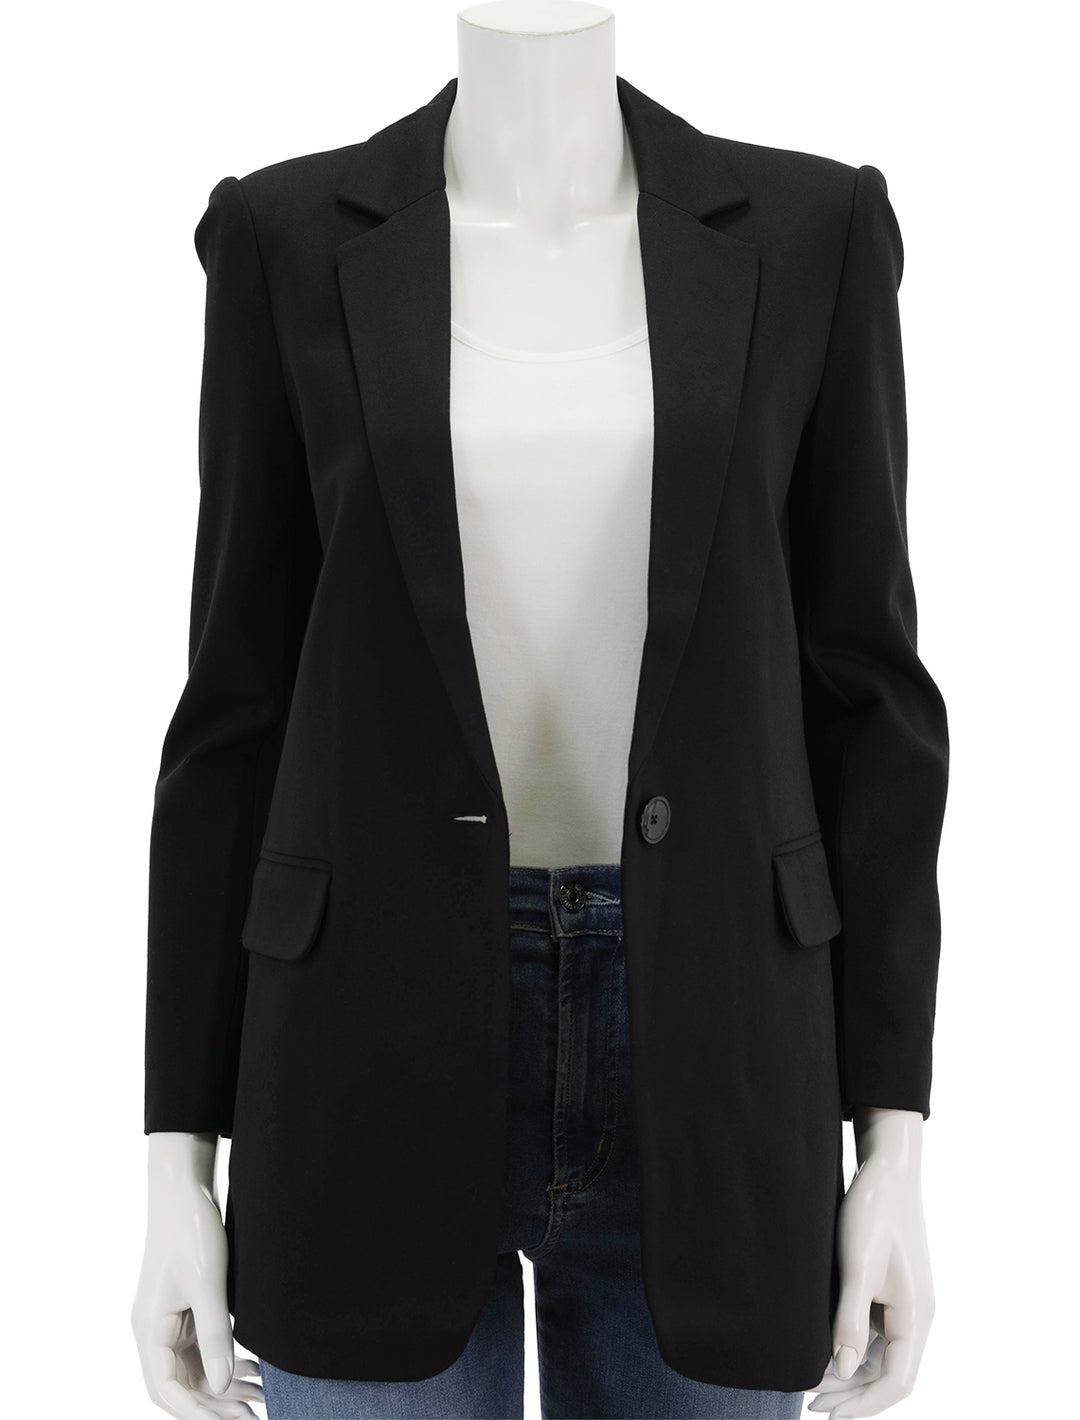 Front view of Sundays NYC's gibson blazer in black, unbuttoned.